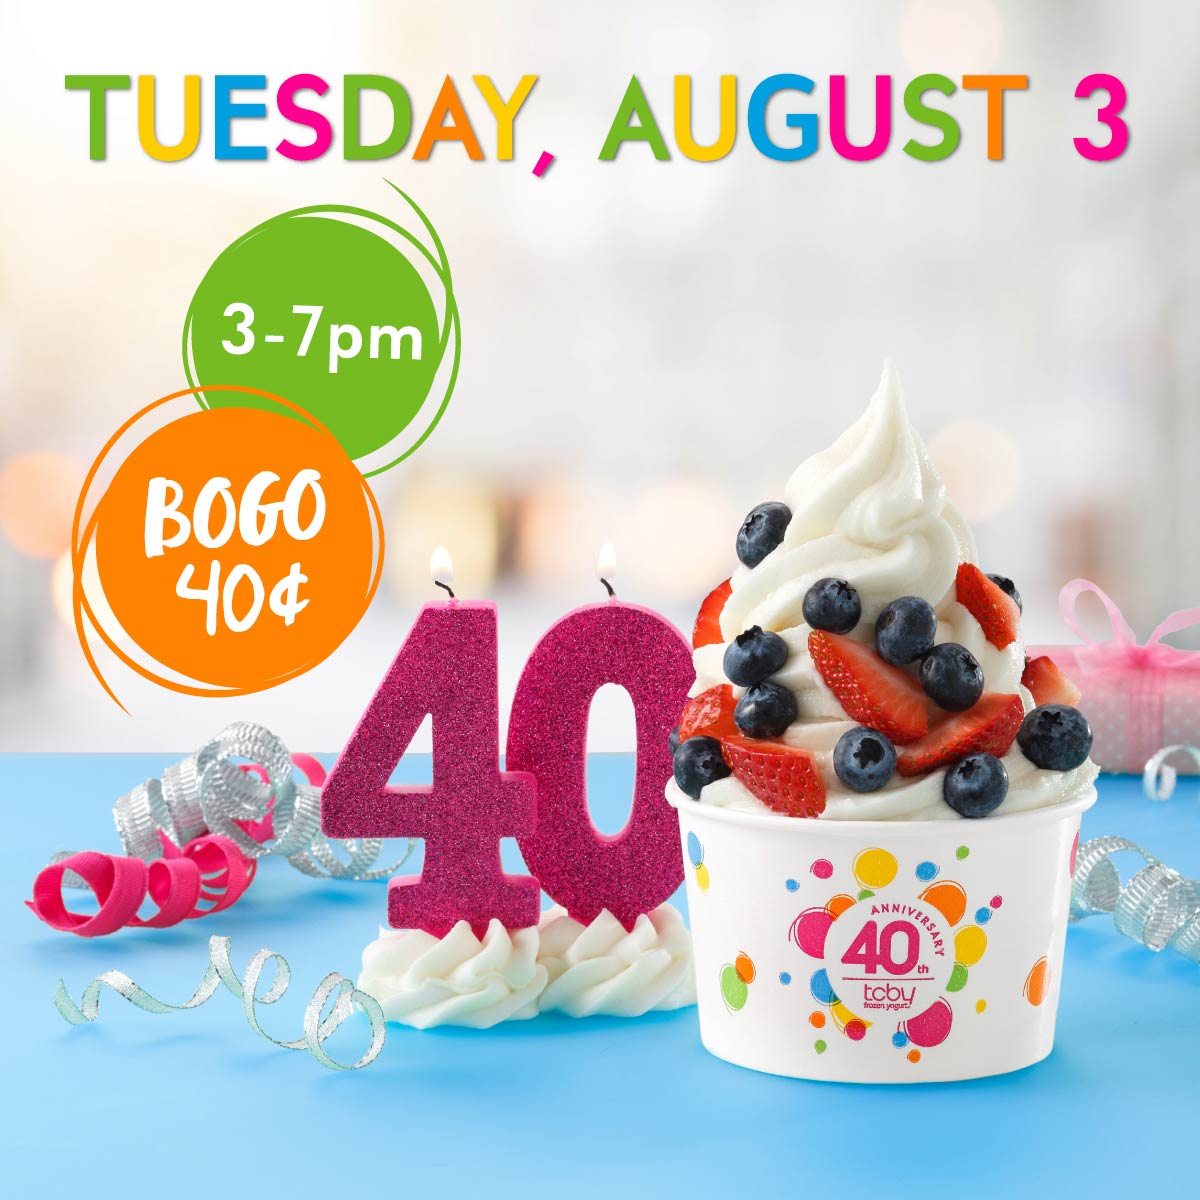 TCBY restaurants Coupon  Second frozen yogurt ice cream .40 cents 3-7p today at TCBY #tcby 